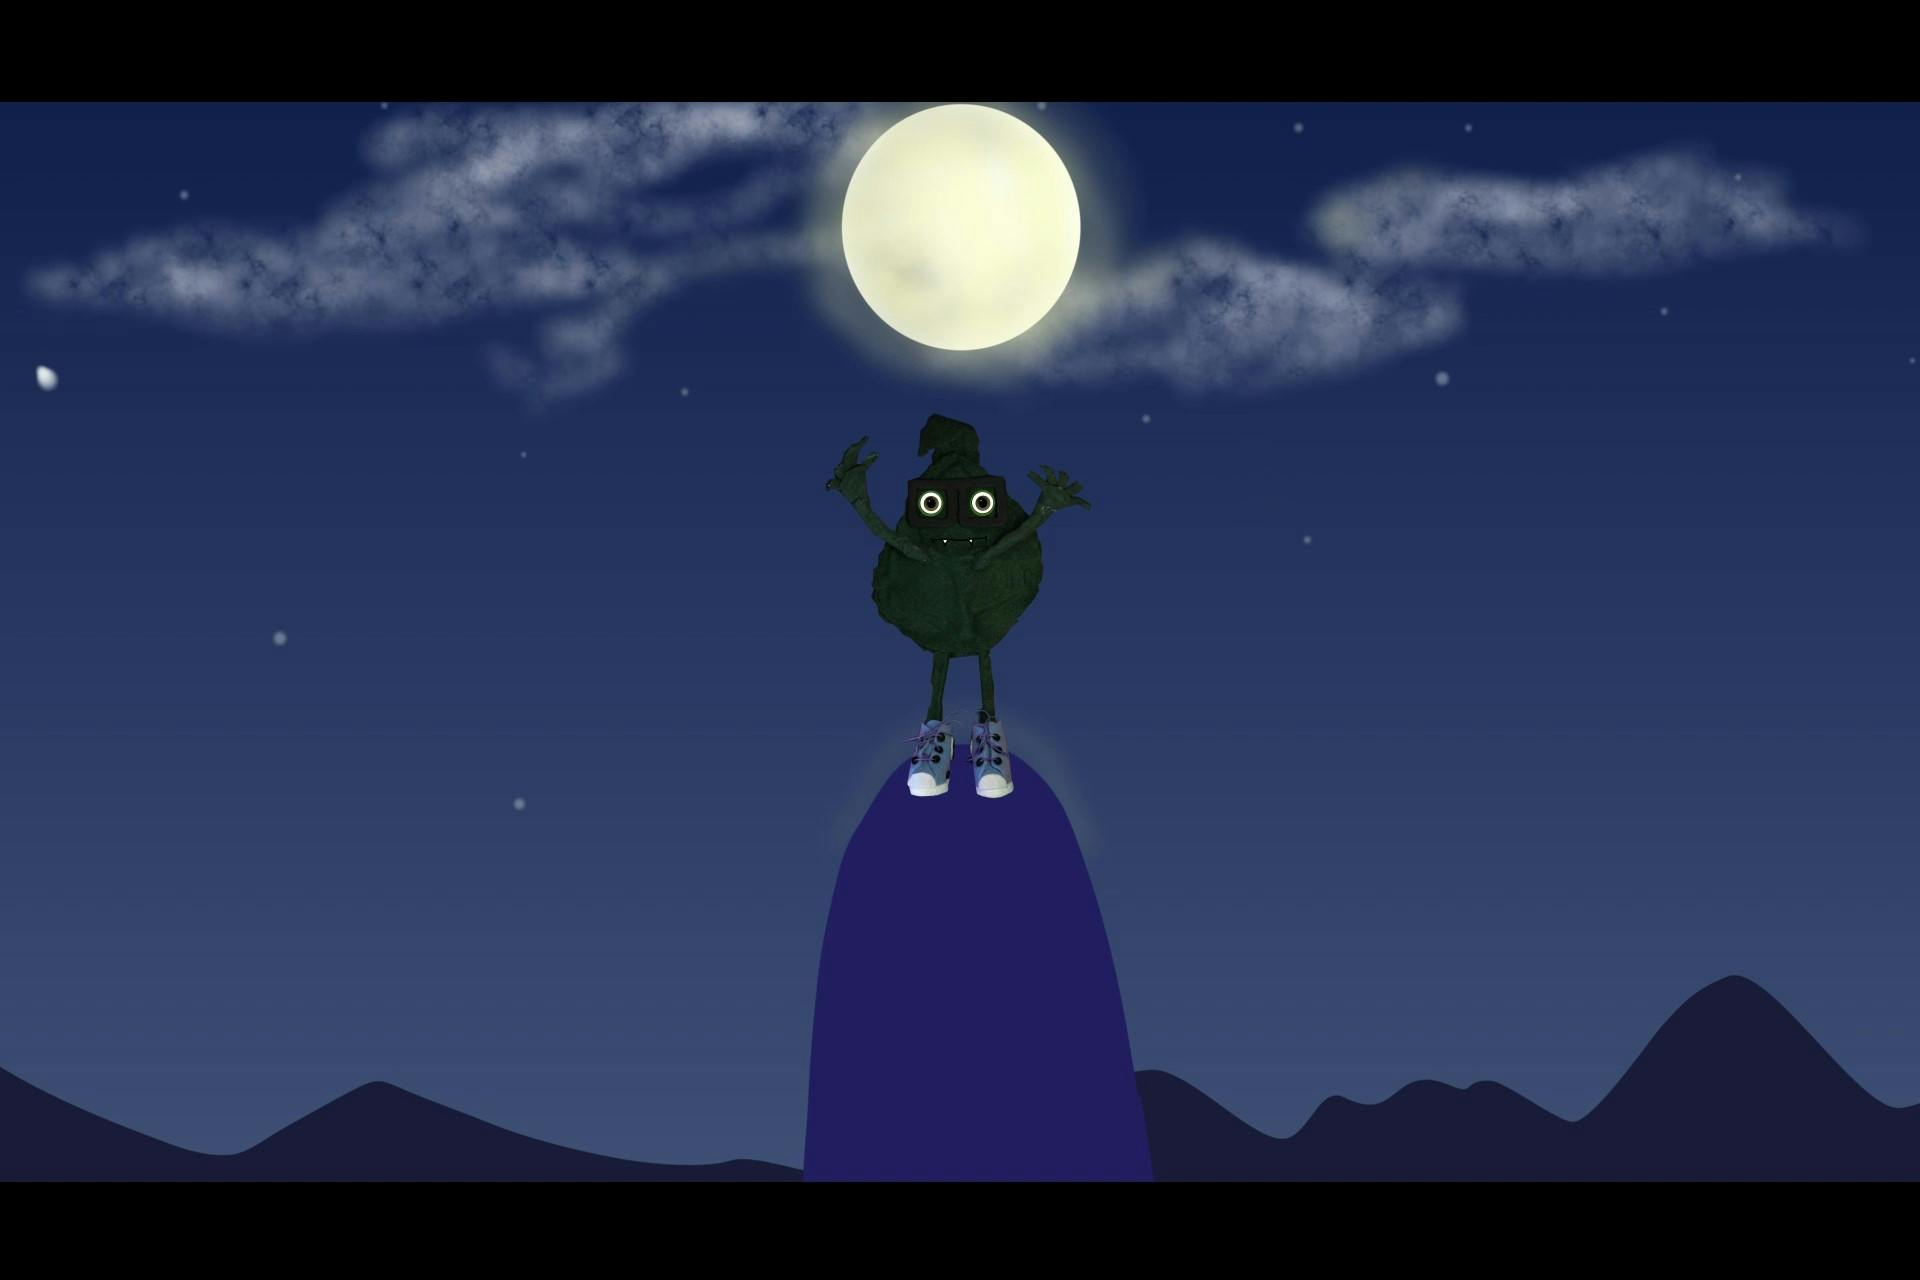 image of a piece of Kale with eyeballs and sneakers, with arms outstretched, standing on a mountain at night. He's looking at the camera